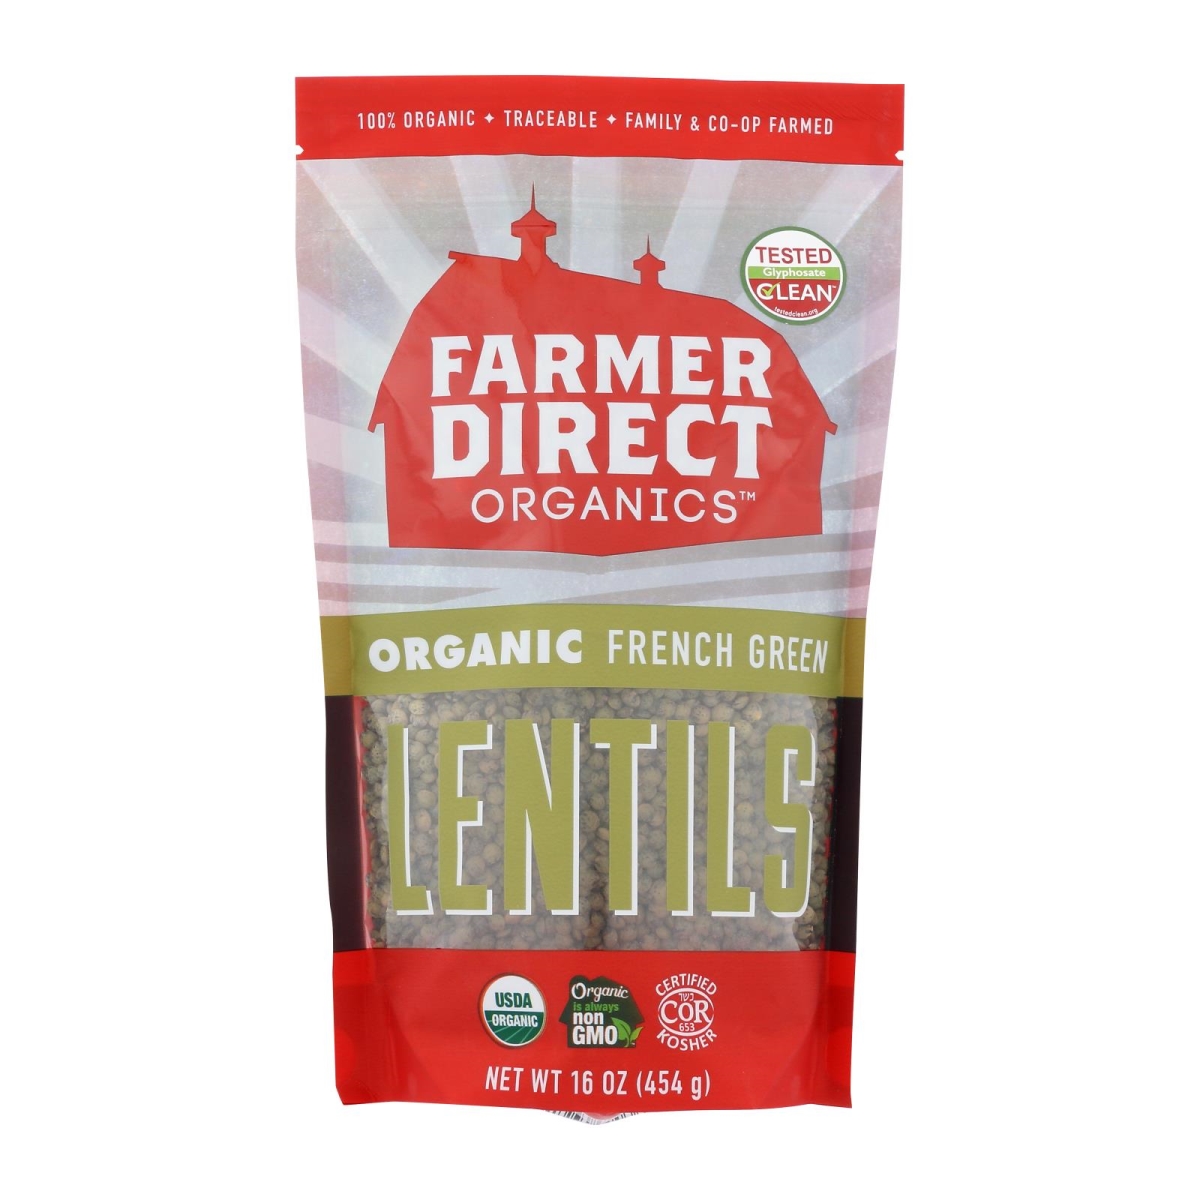 Picture of Farmer Direct HG1834316 1 lbs Organic French Green Lentils Dry Beans - Case of 12